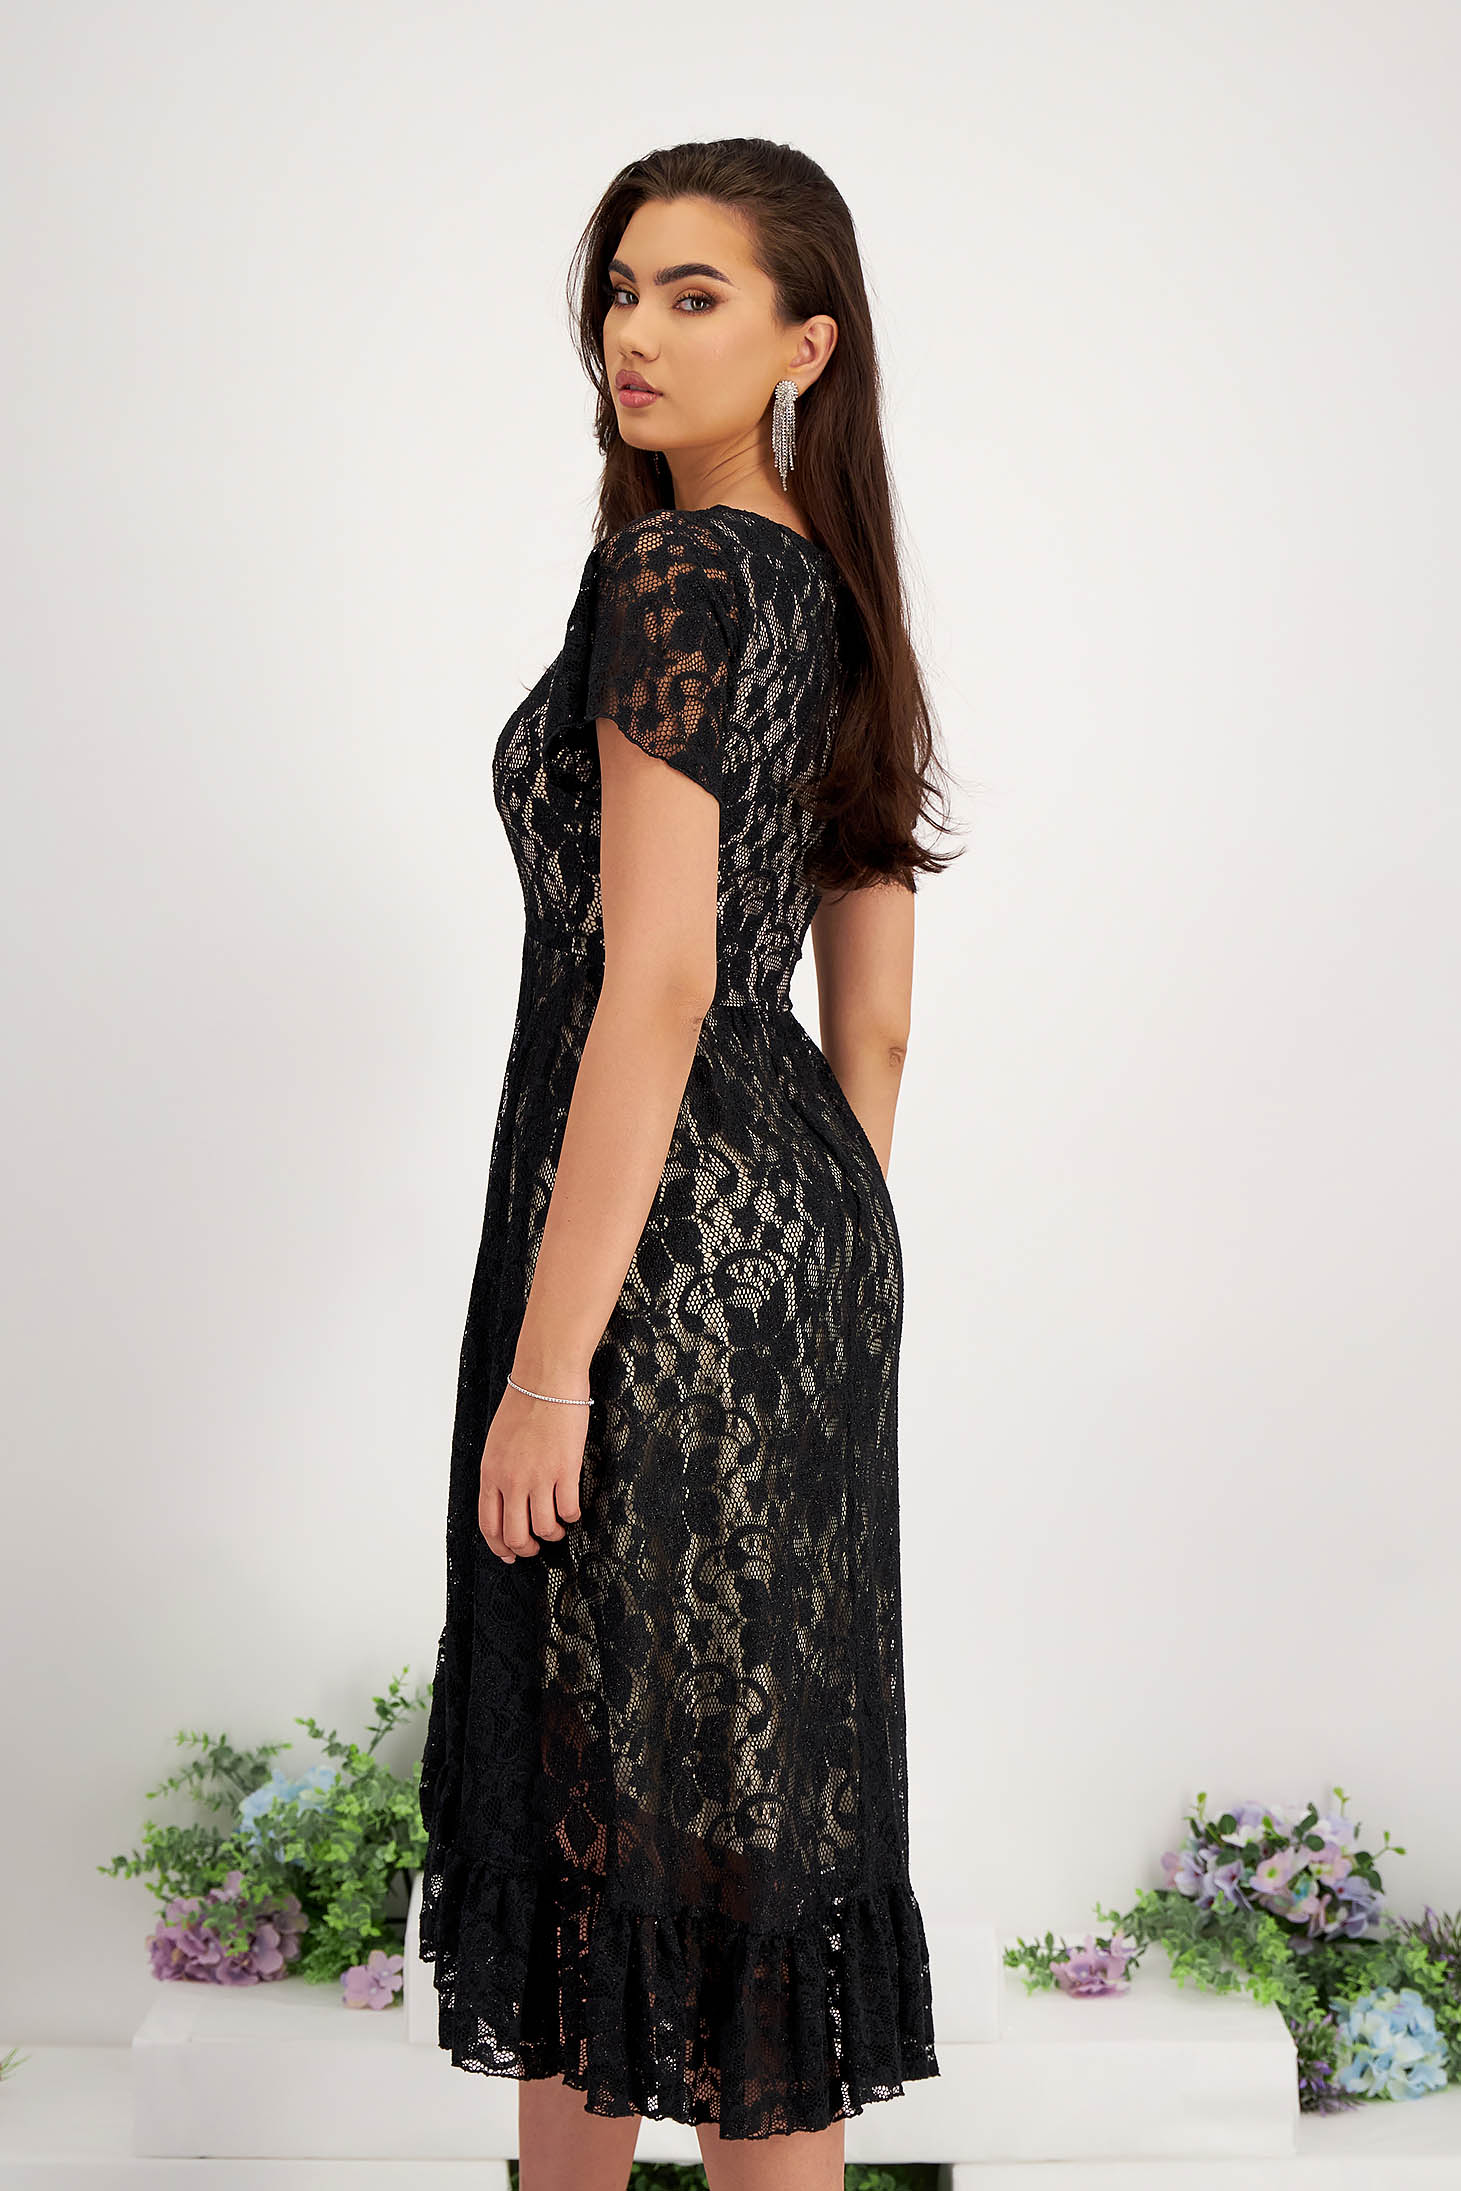 Asymmetrical Black Lace Dress in A-line with Butterfly Sleeves - StarShinerS 2 - StarShinerS.com